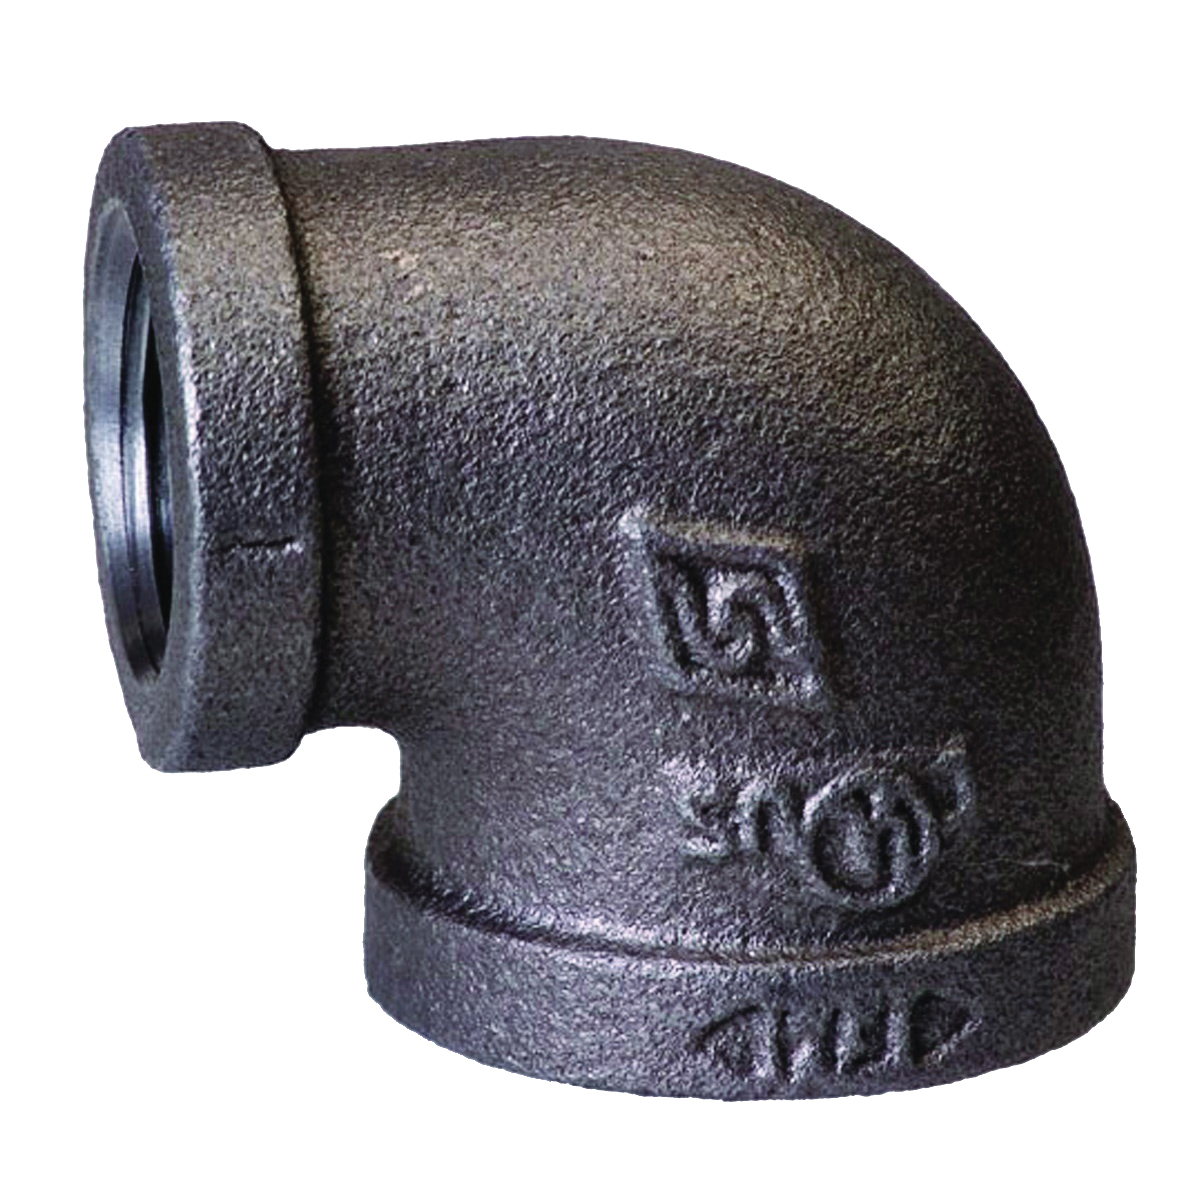 Prosource B90R 32X25 Reducing Pipe Elbow, 1-1/4 x 1 in, FIP, 90 deg Angle, Malleable Iron, SCH 40 Schedule